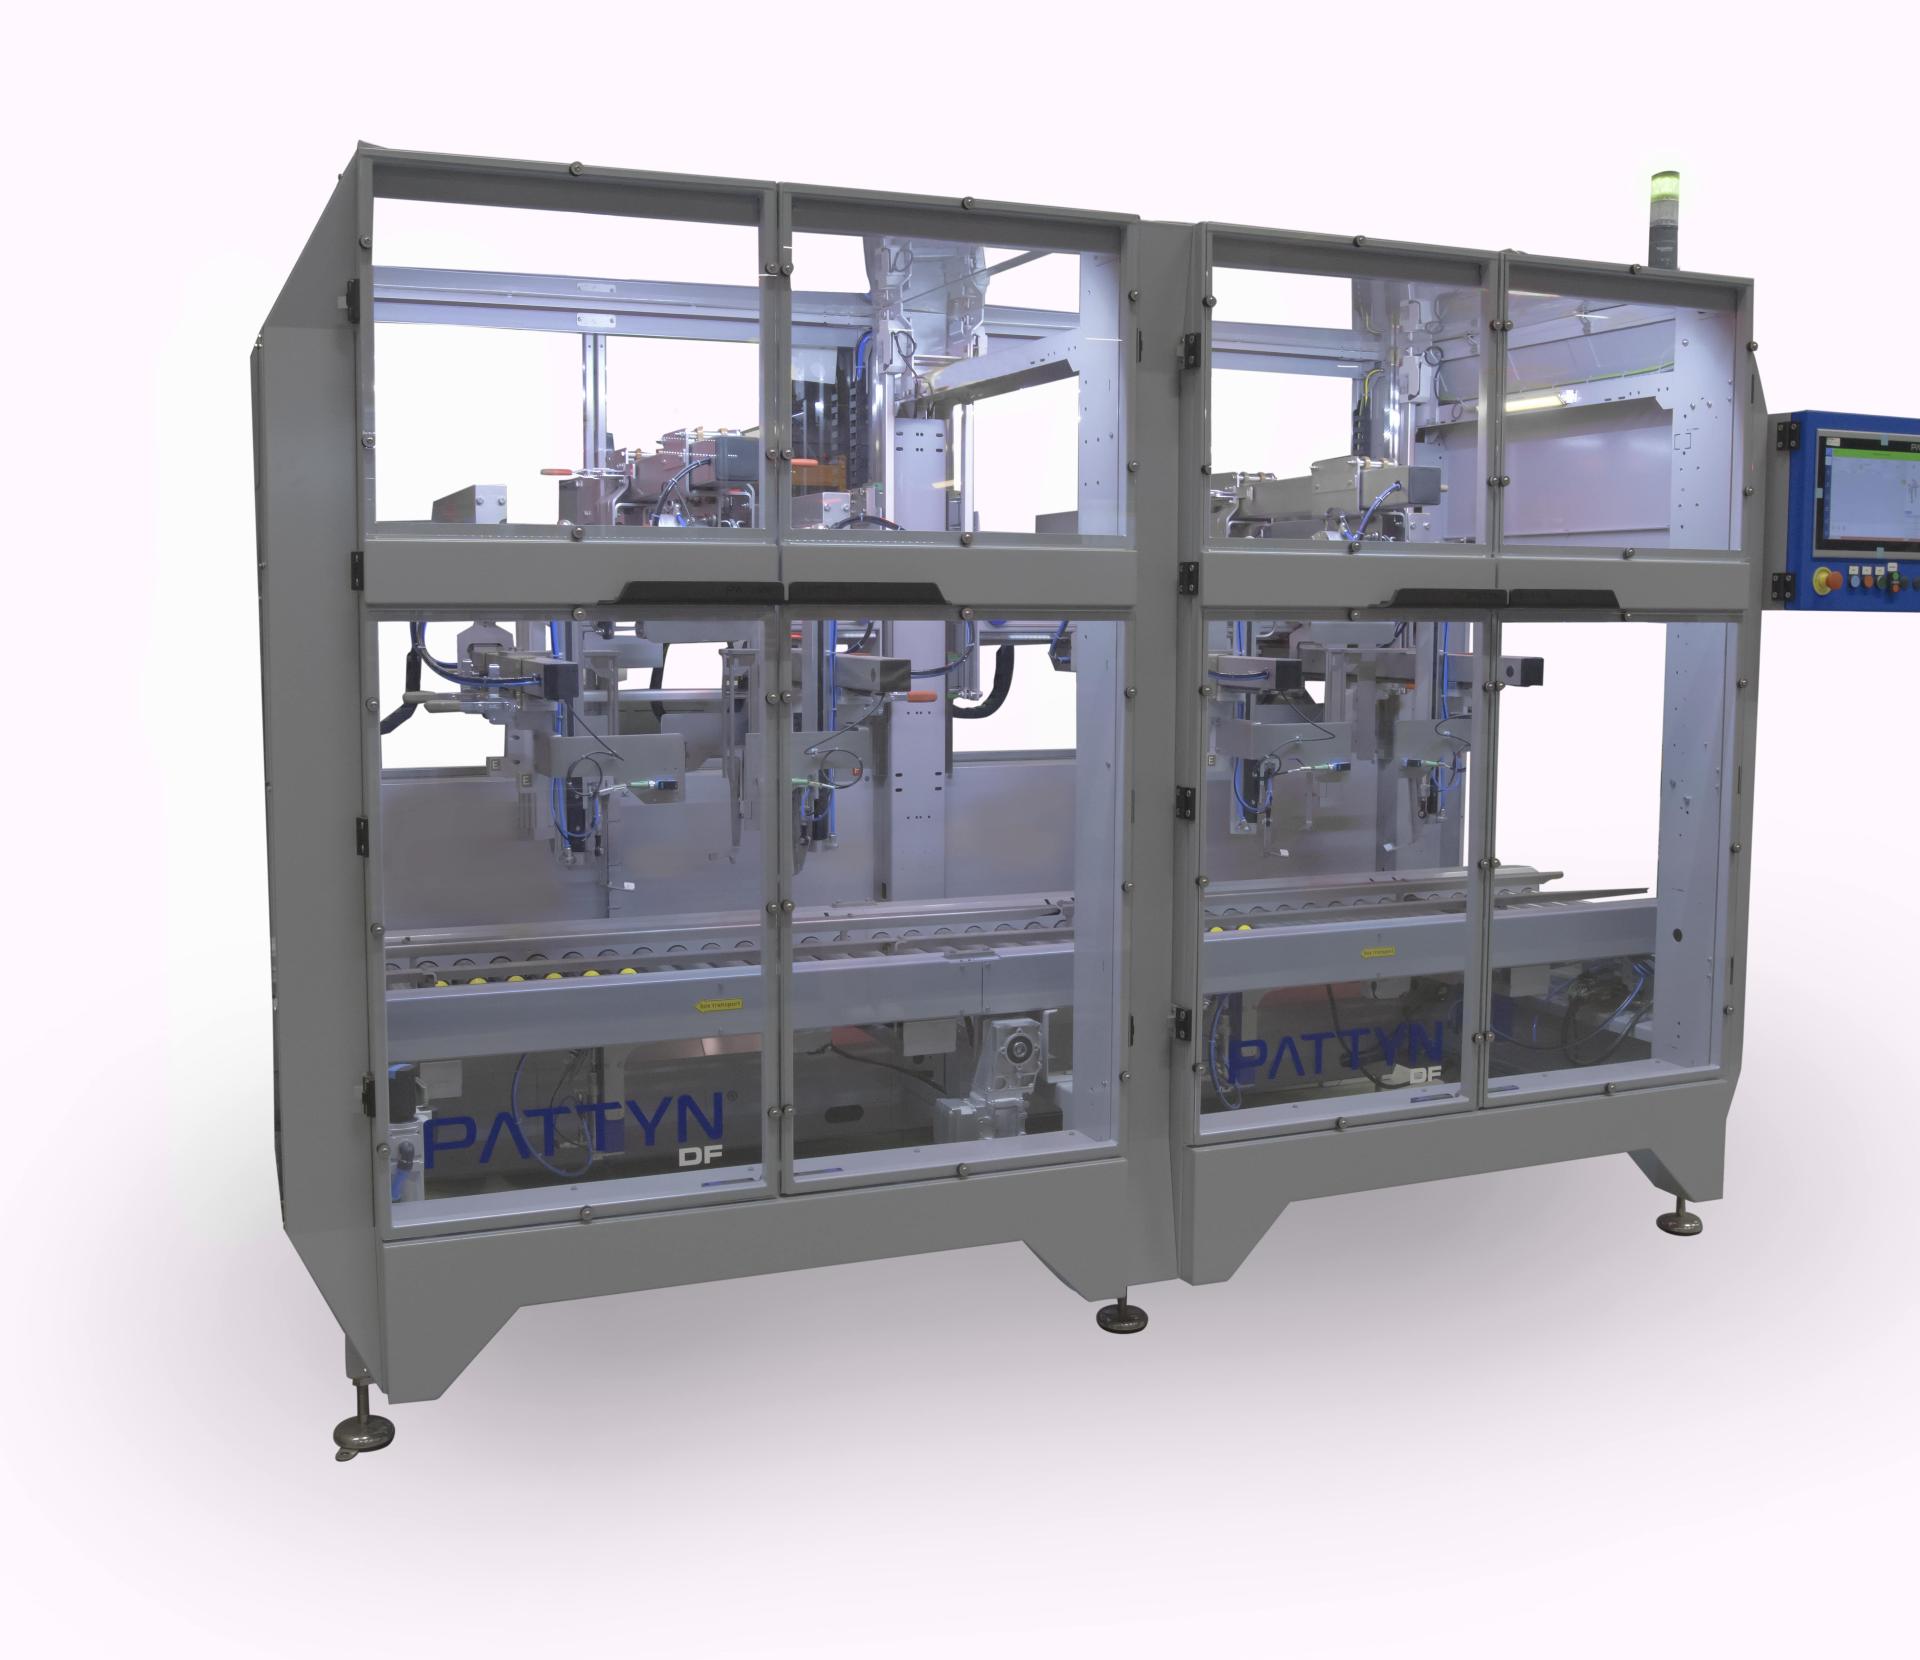 DF-32 perfect bag folding, automated machine built by Pattyn